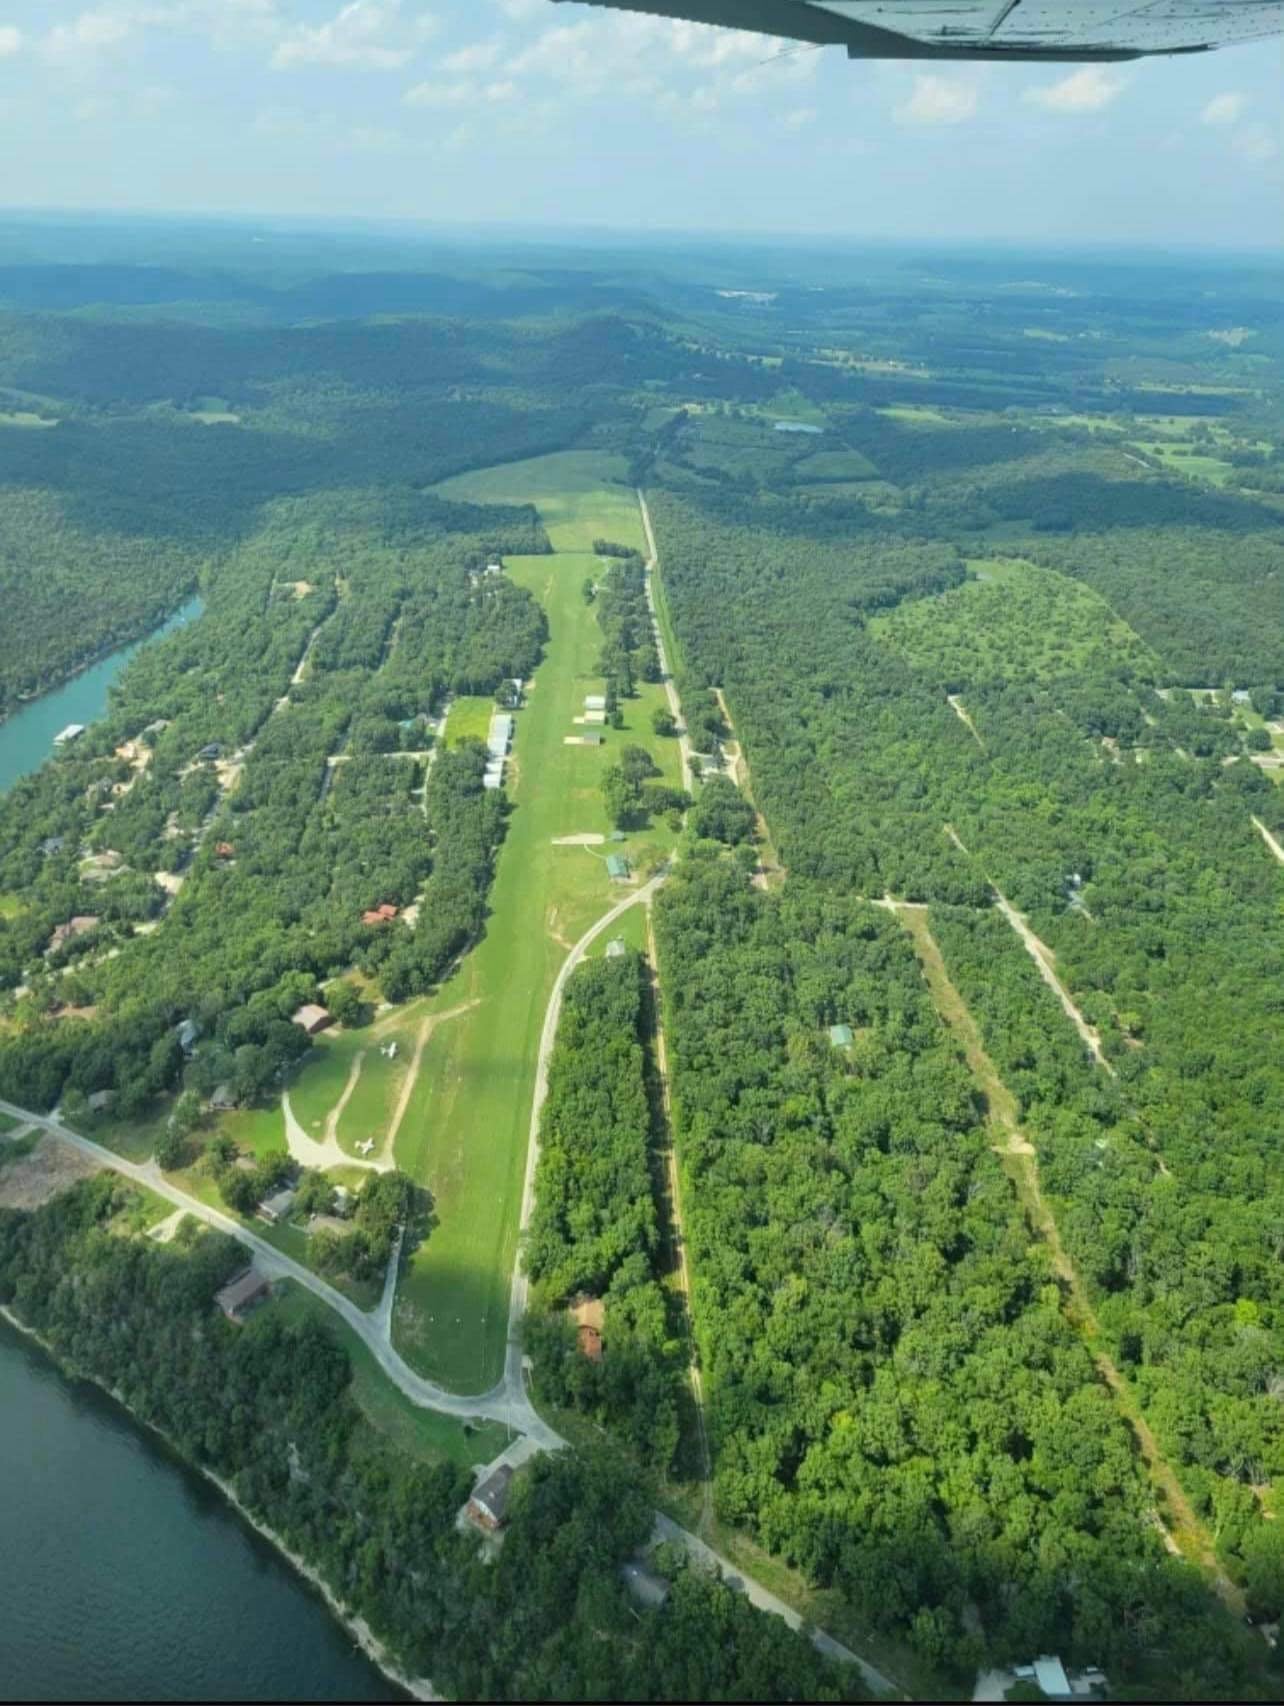 Turkey Mountain Airport Welcomes Pilots to Its Community